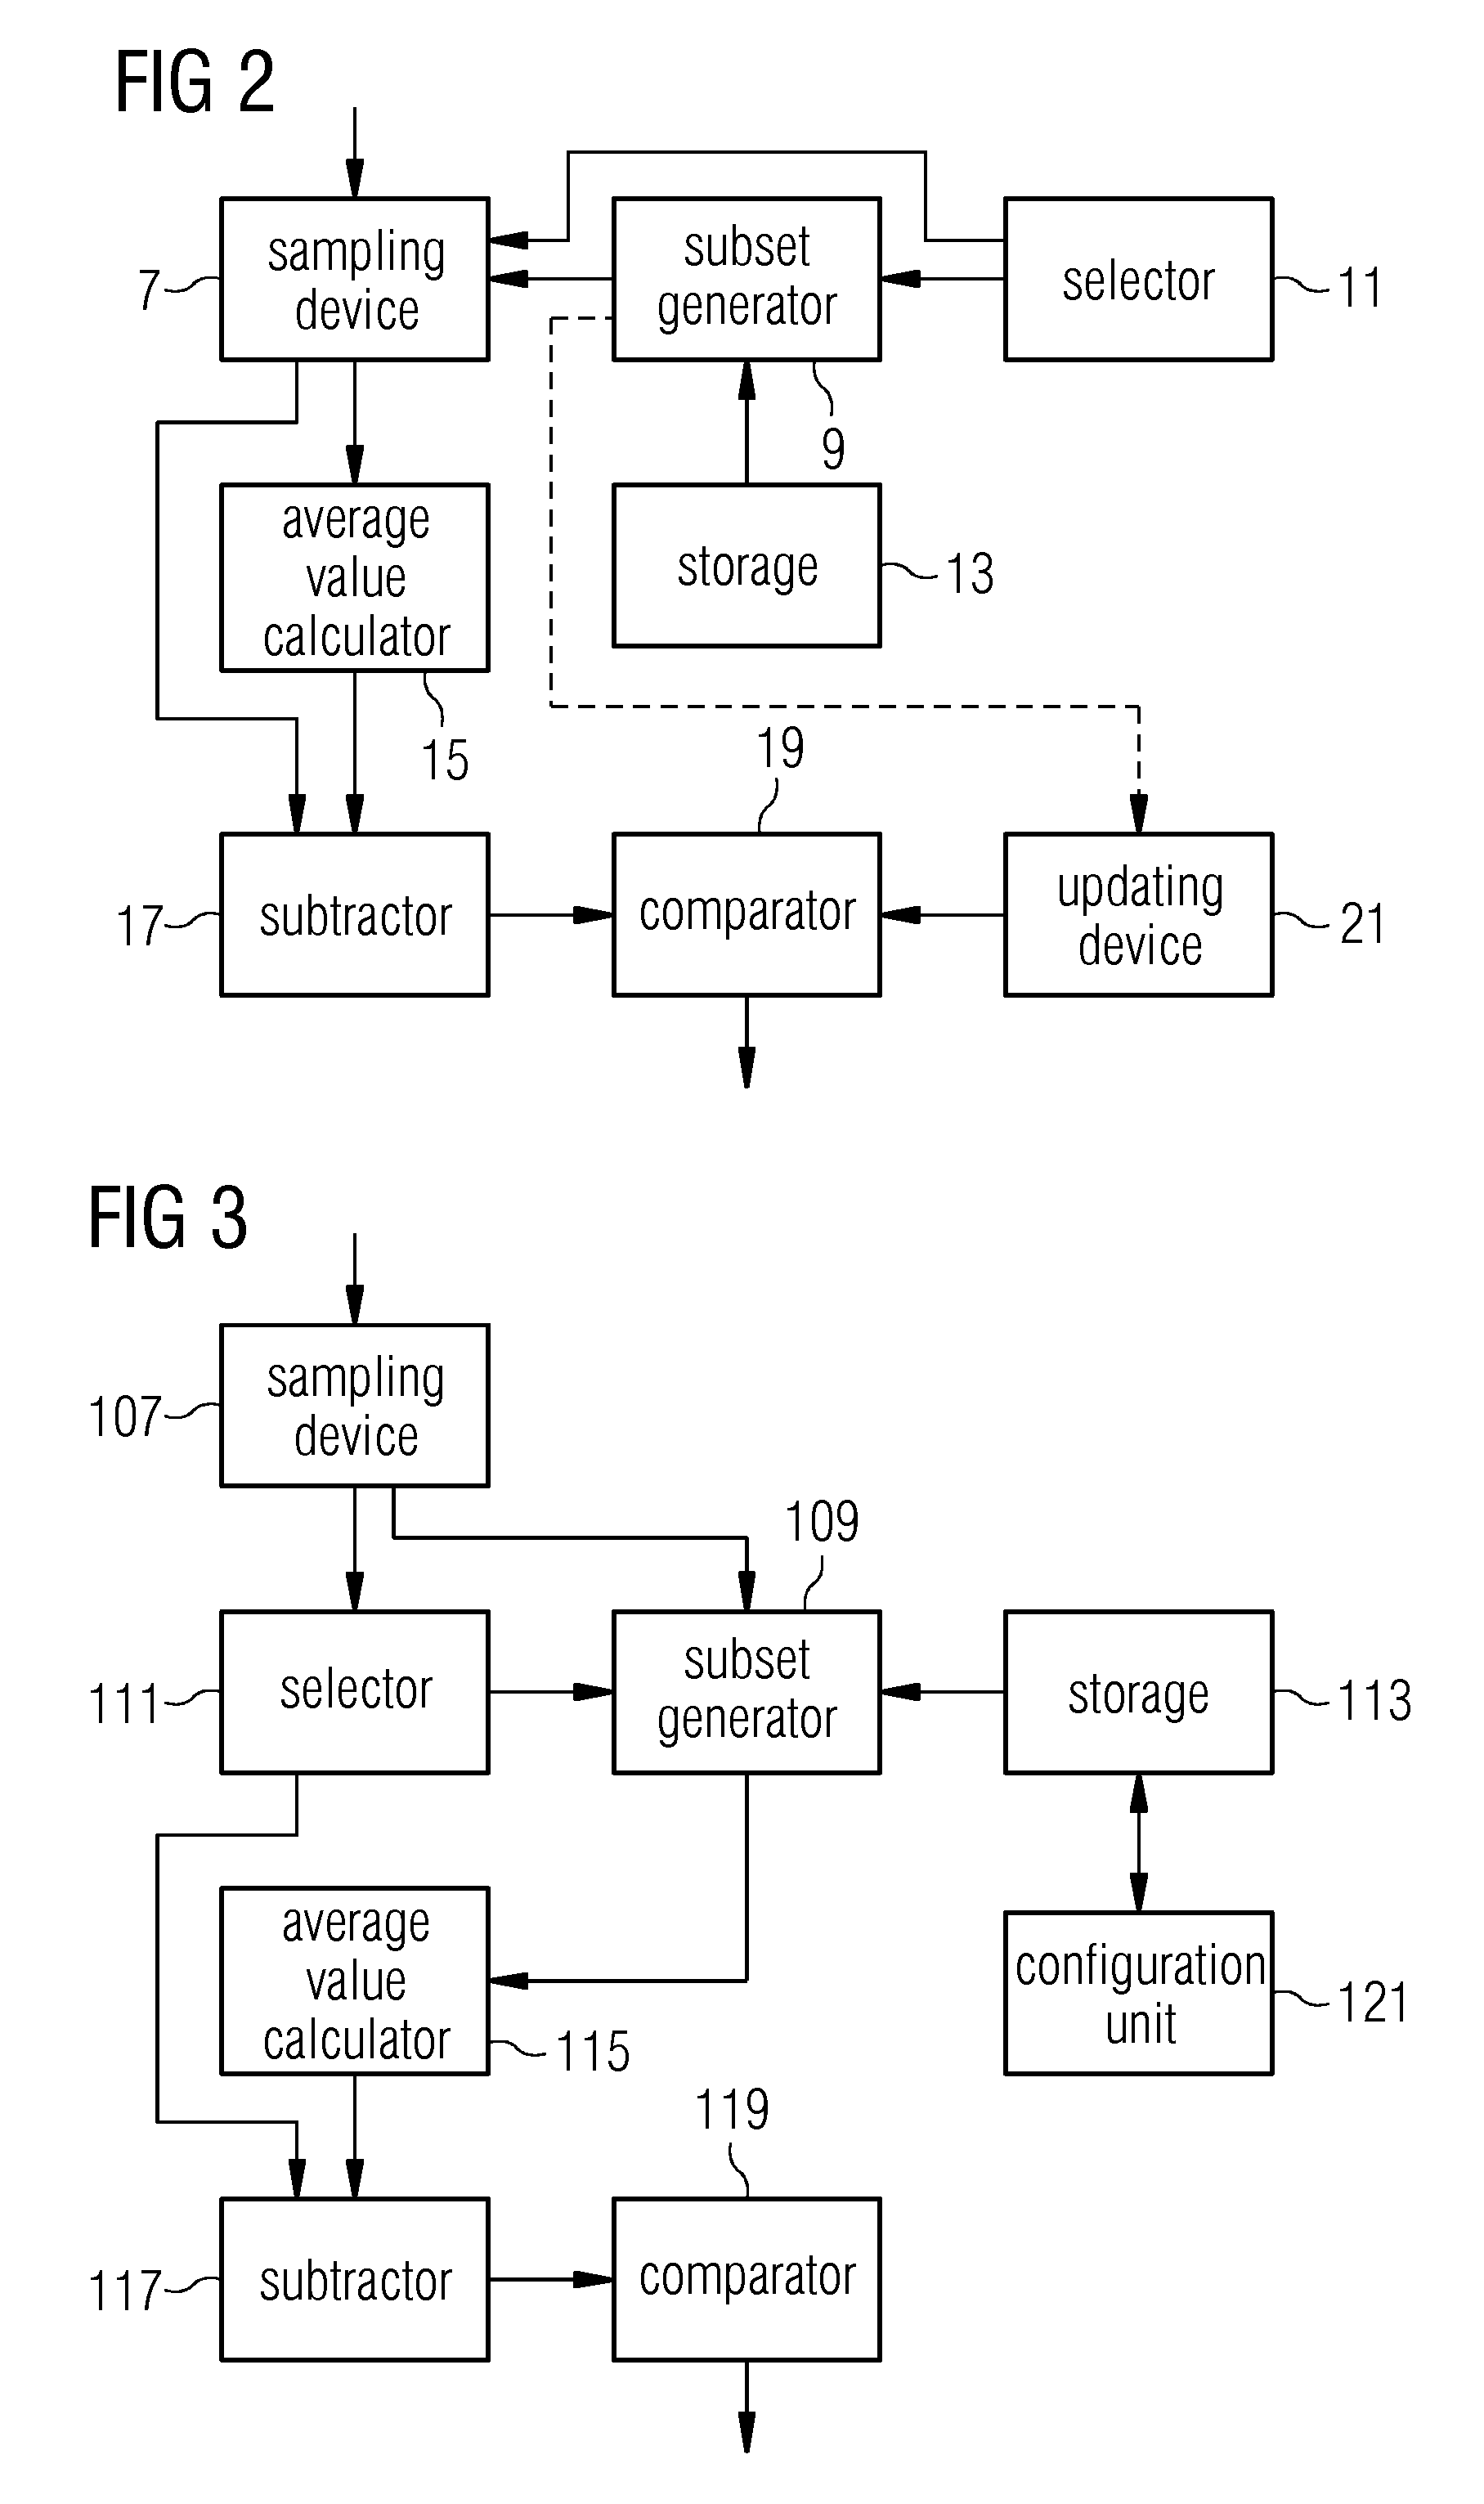 Method of checking a wind turbine in a wind farm for a yaw misalignment, method of monitoring a wind turbine in a wind farm and monitoring apparatus